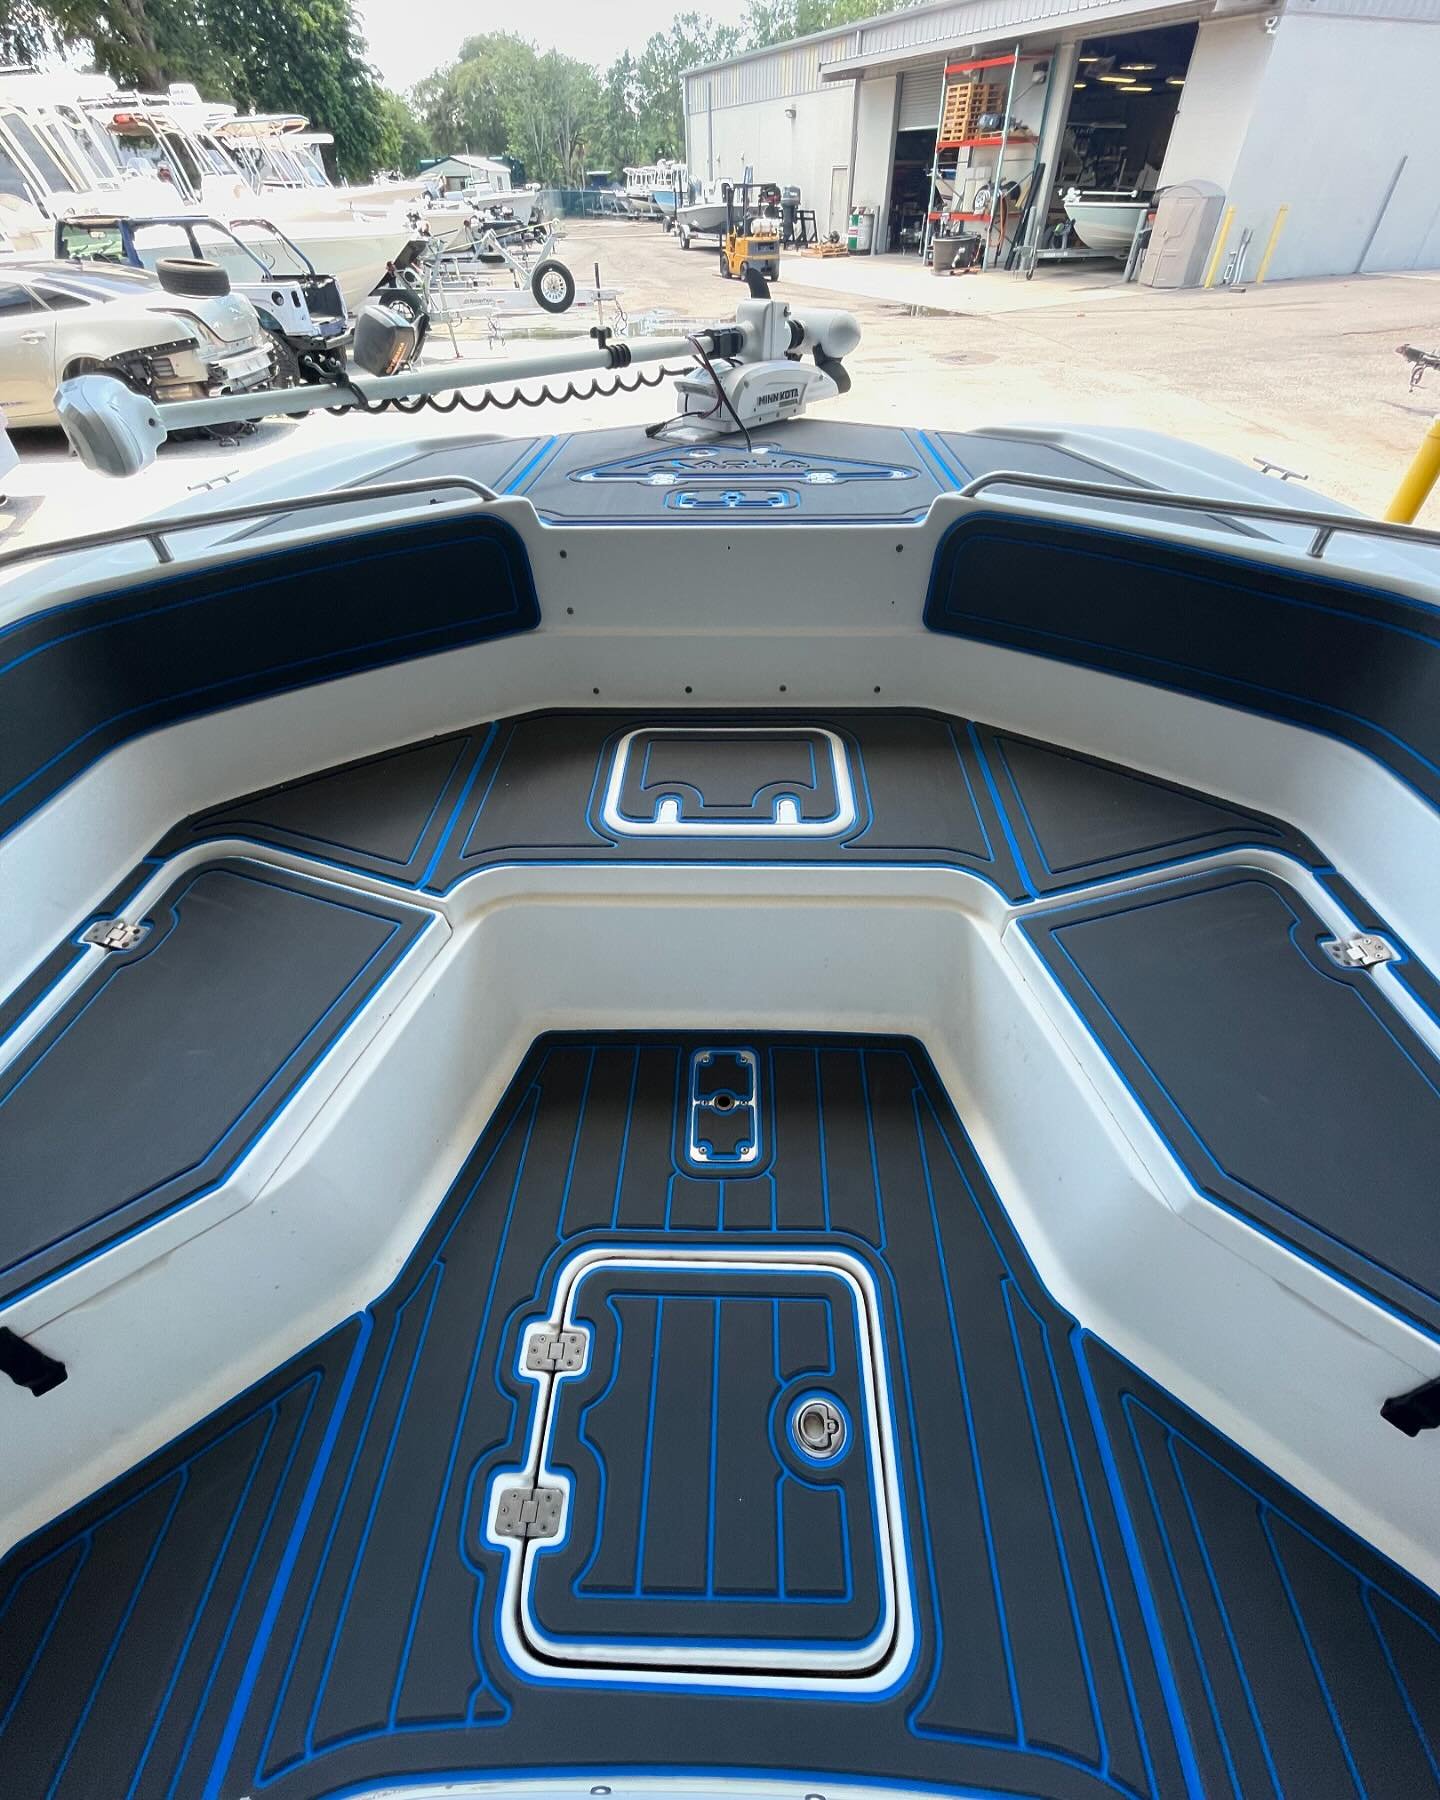 Spring is in full swing here at AquaTraction of North Florida! We are hard at work installing new flooring on a variety of boat makes and models, if you&rsquo;re ready to upgrade your boat this spring and summer contact us today for more information.